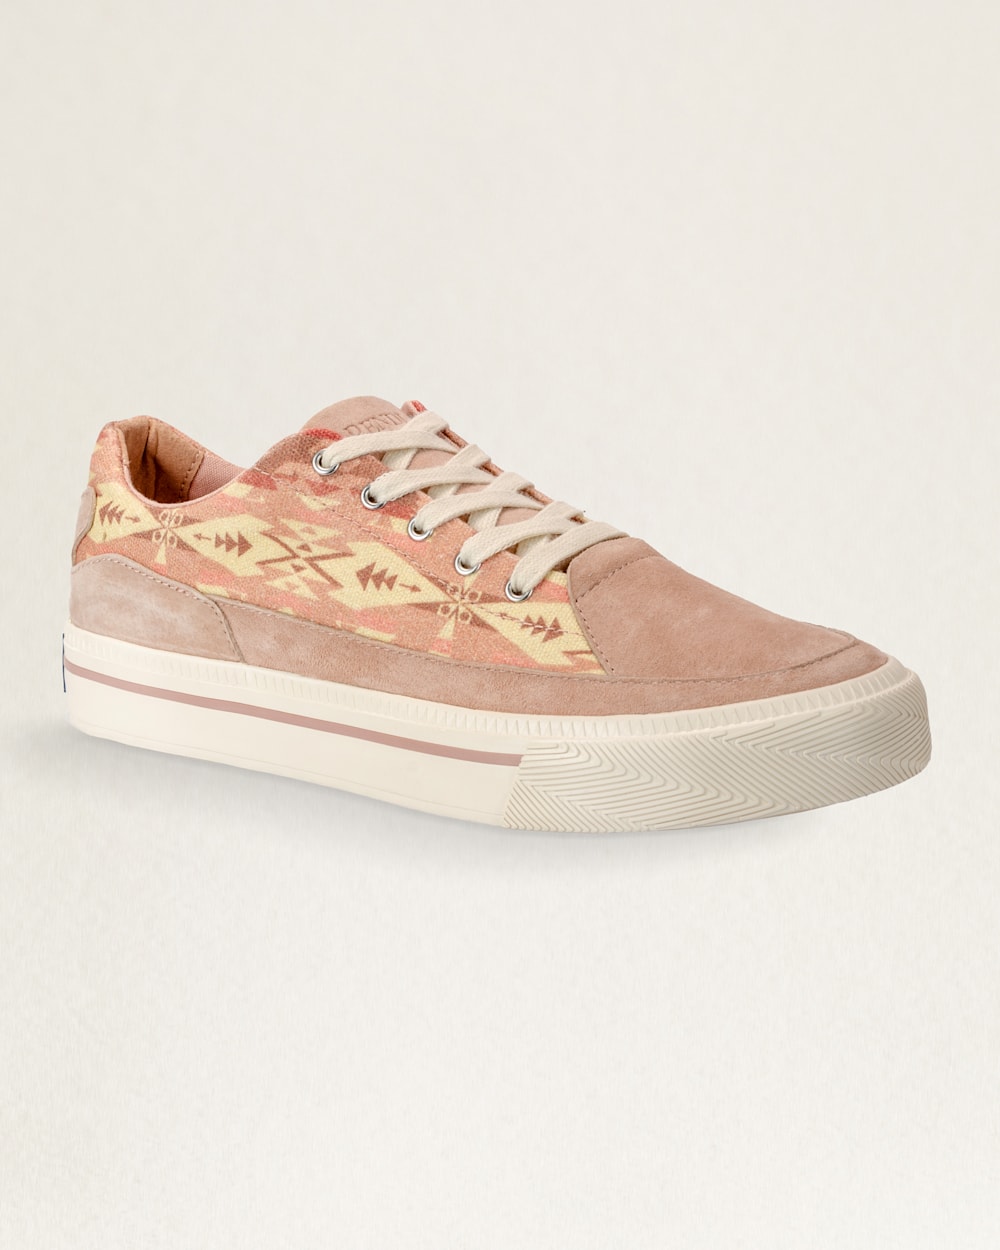 WOMEN'S VULCANIZED SNEAKERS IN ROSE TUCSON image number 1